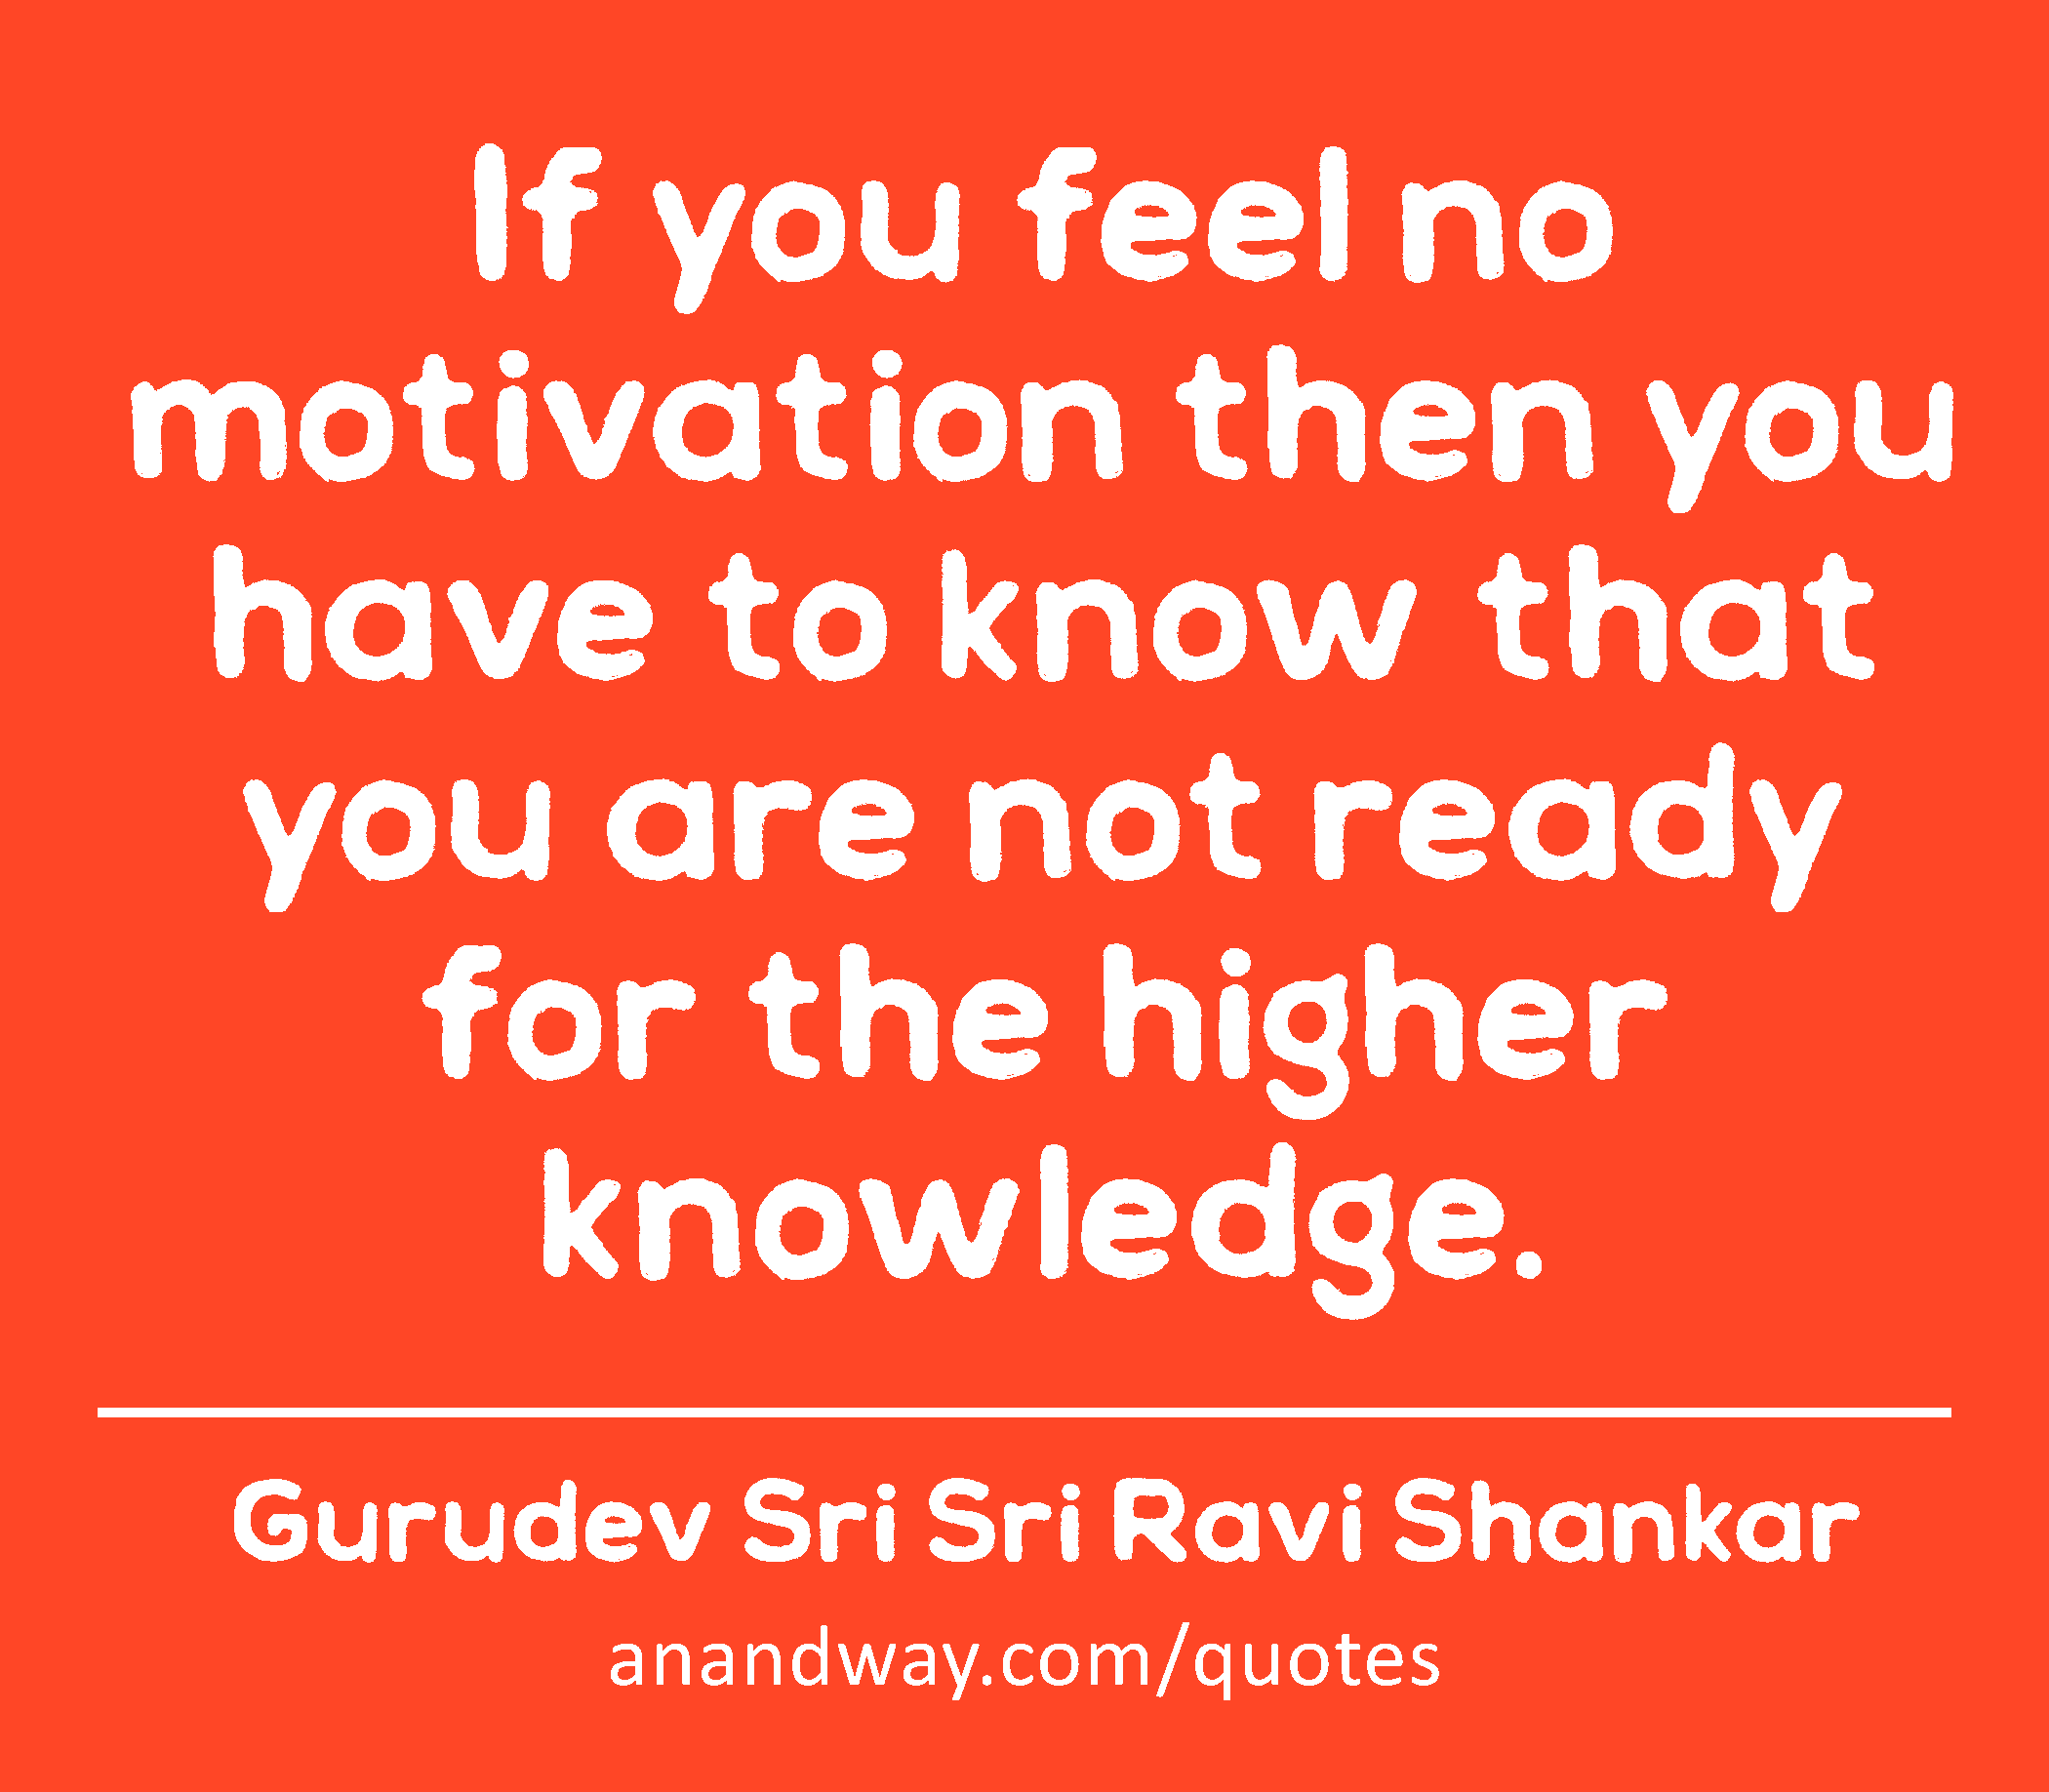 If you feel no motivation then you have to know that you are not ready for the higher knowledge. 
 -Gurudev Sri Sri Ravi Shankar